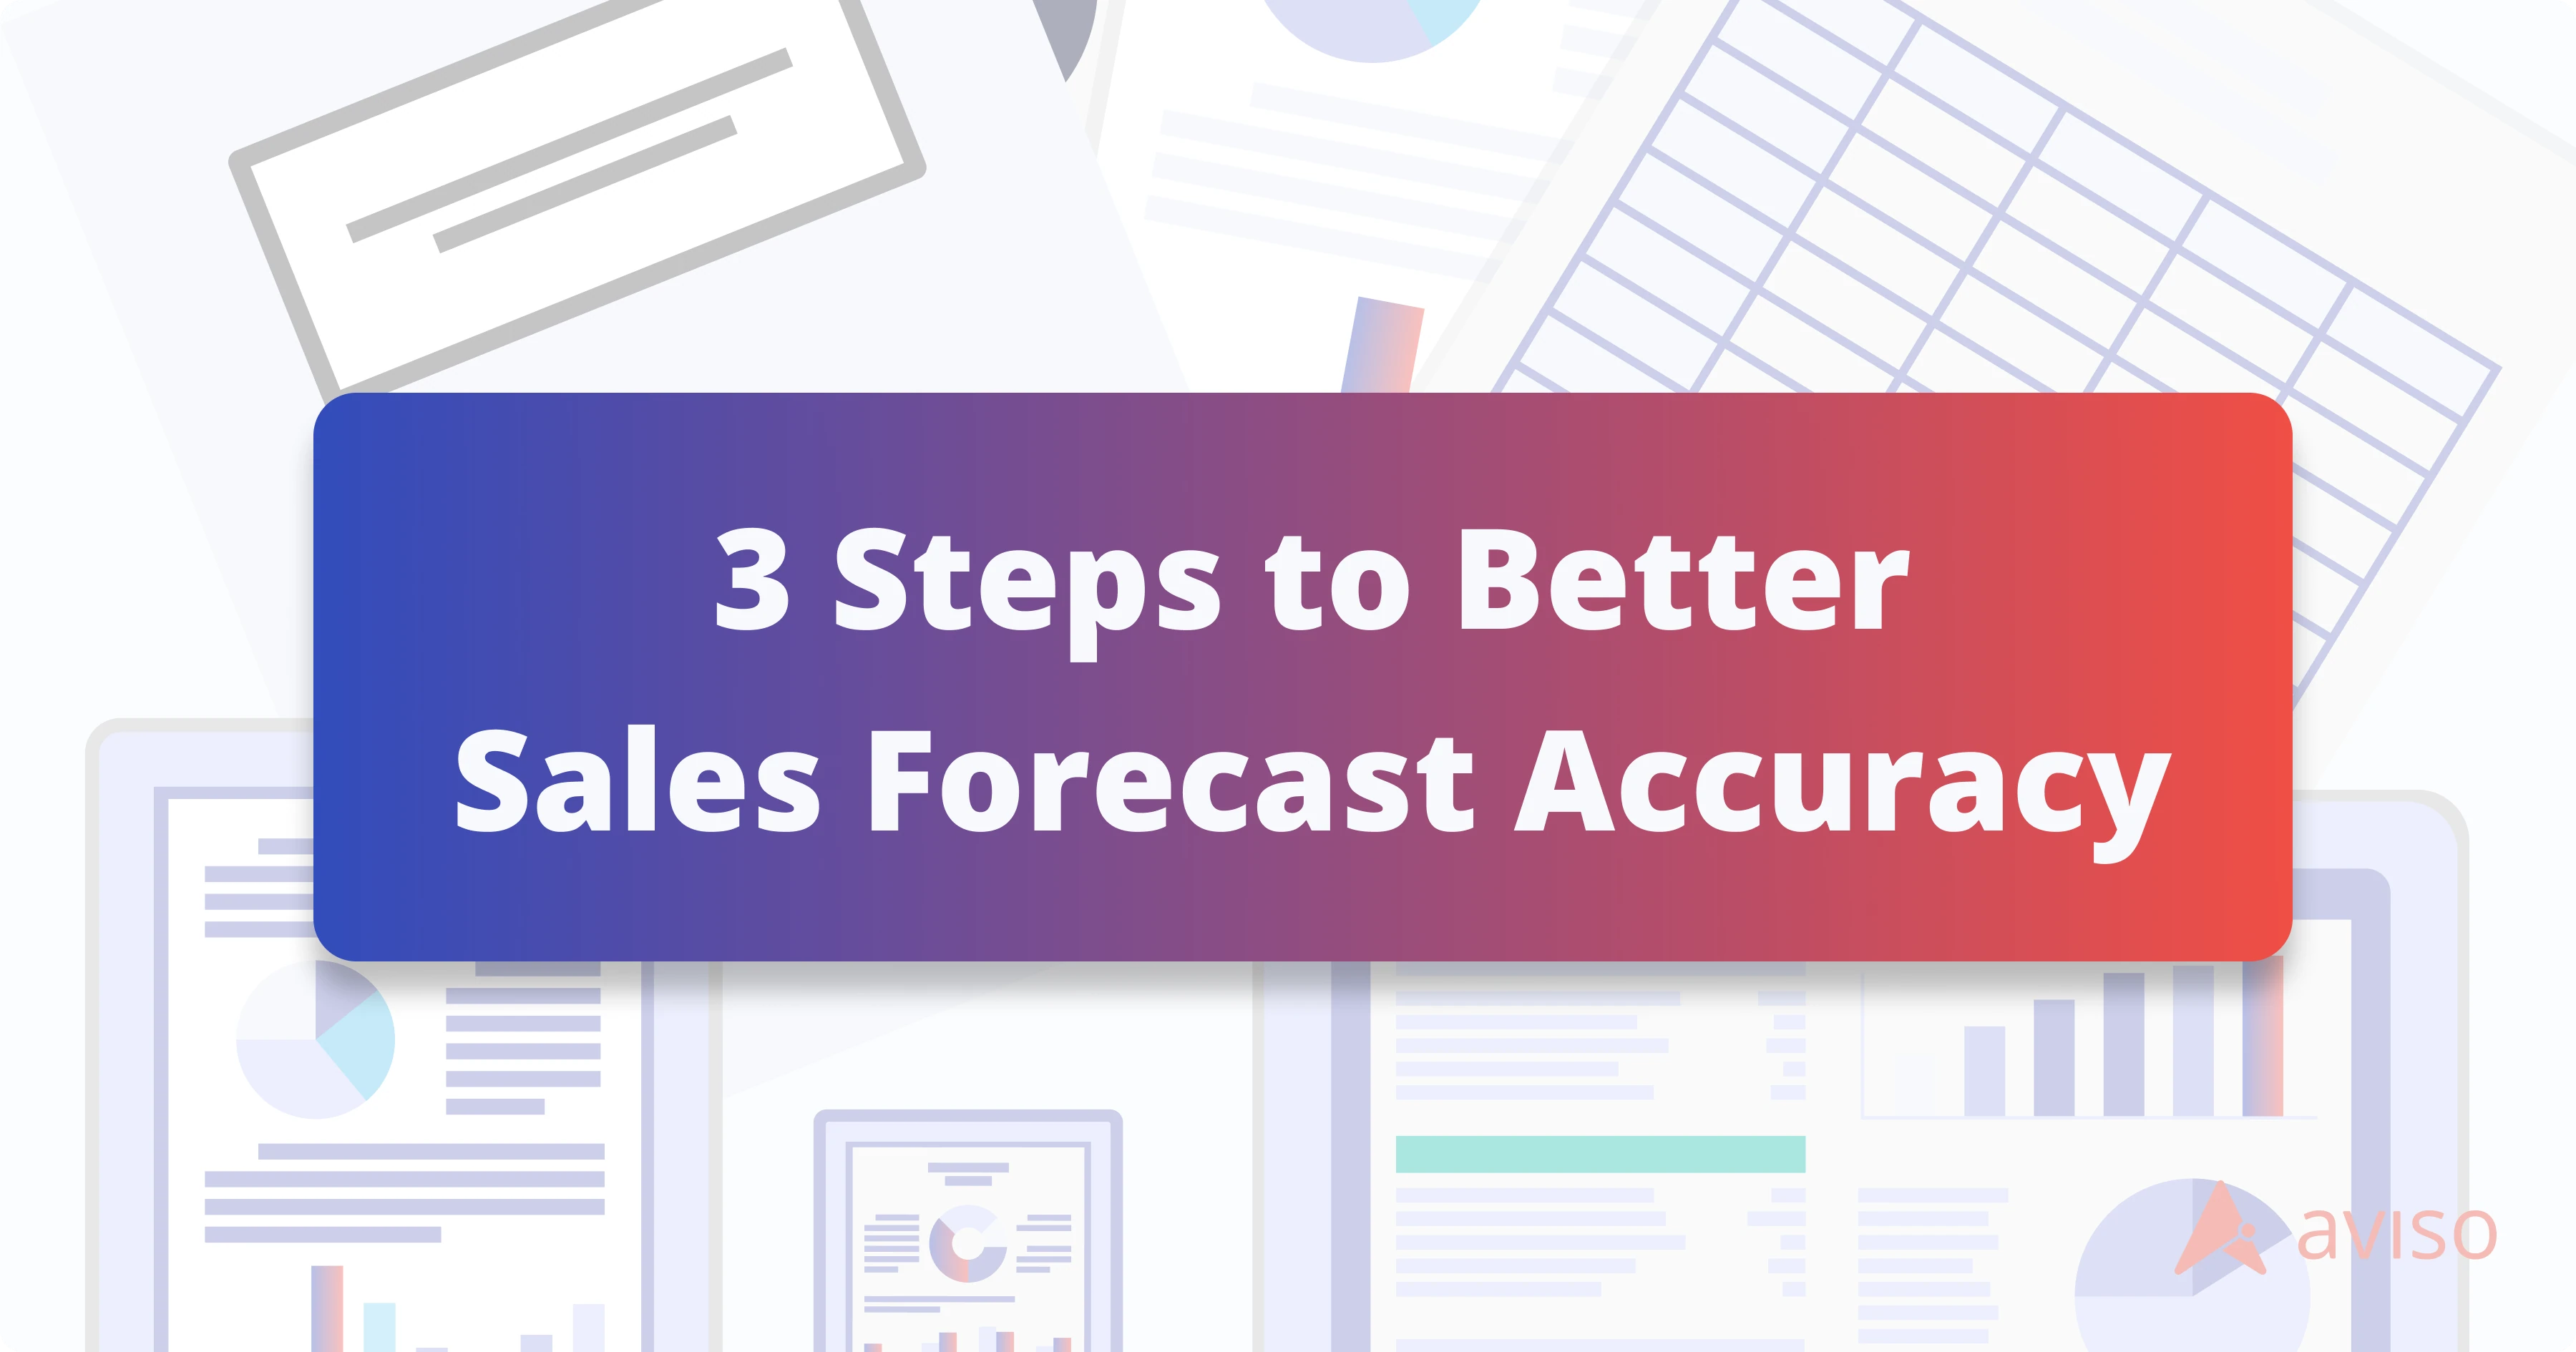 3 Steps to Better Sales Forecast Accuracy